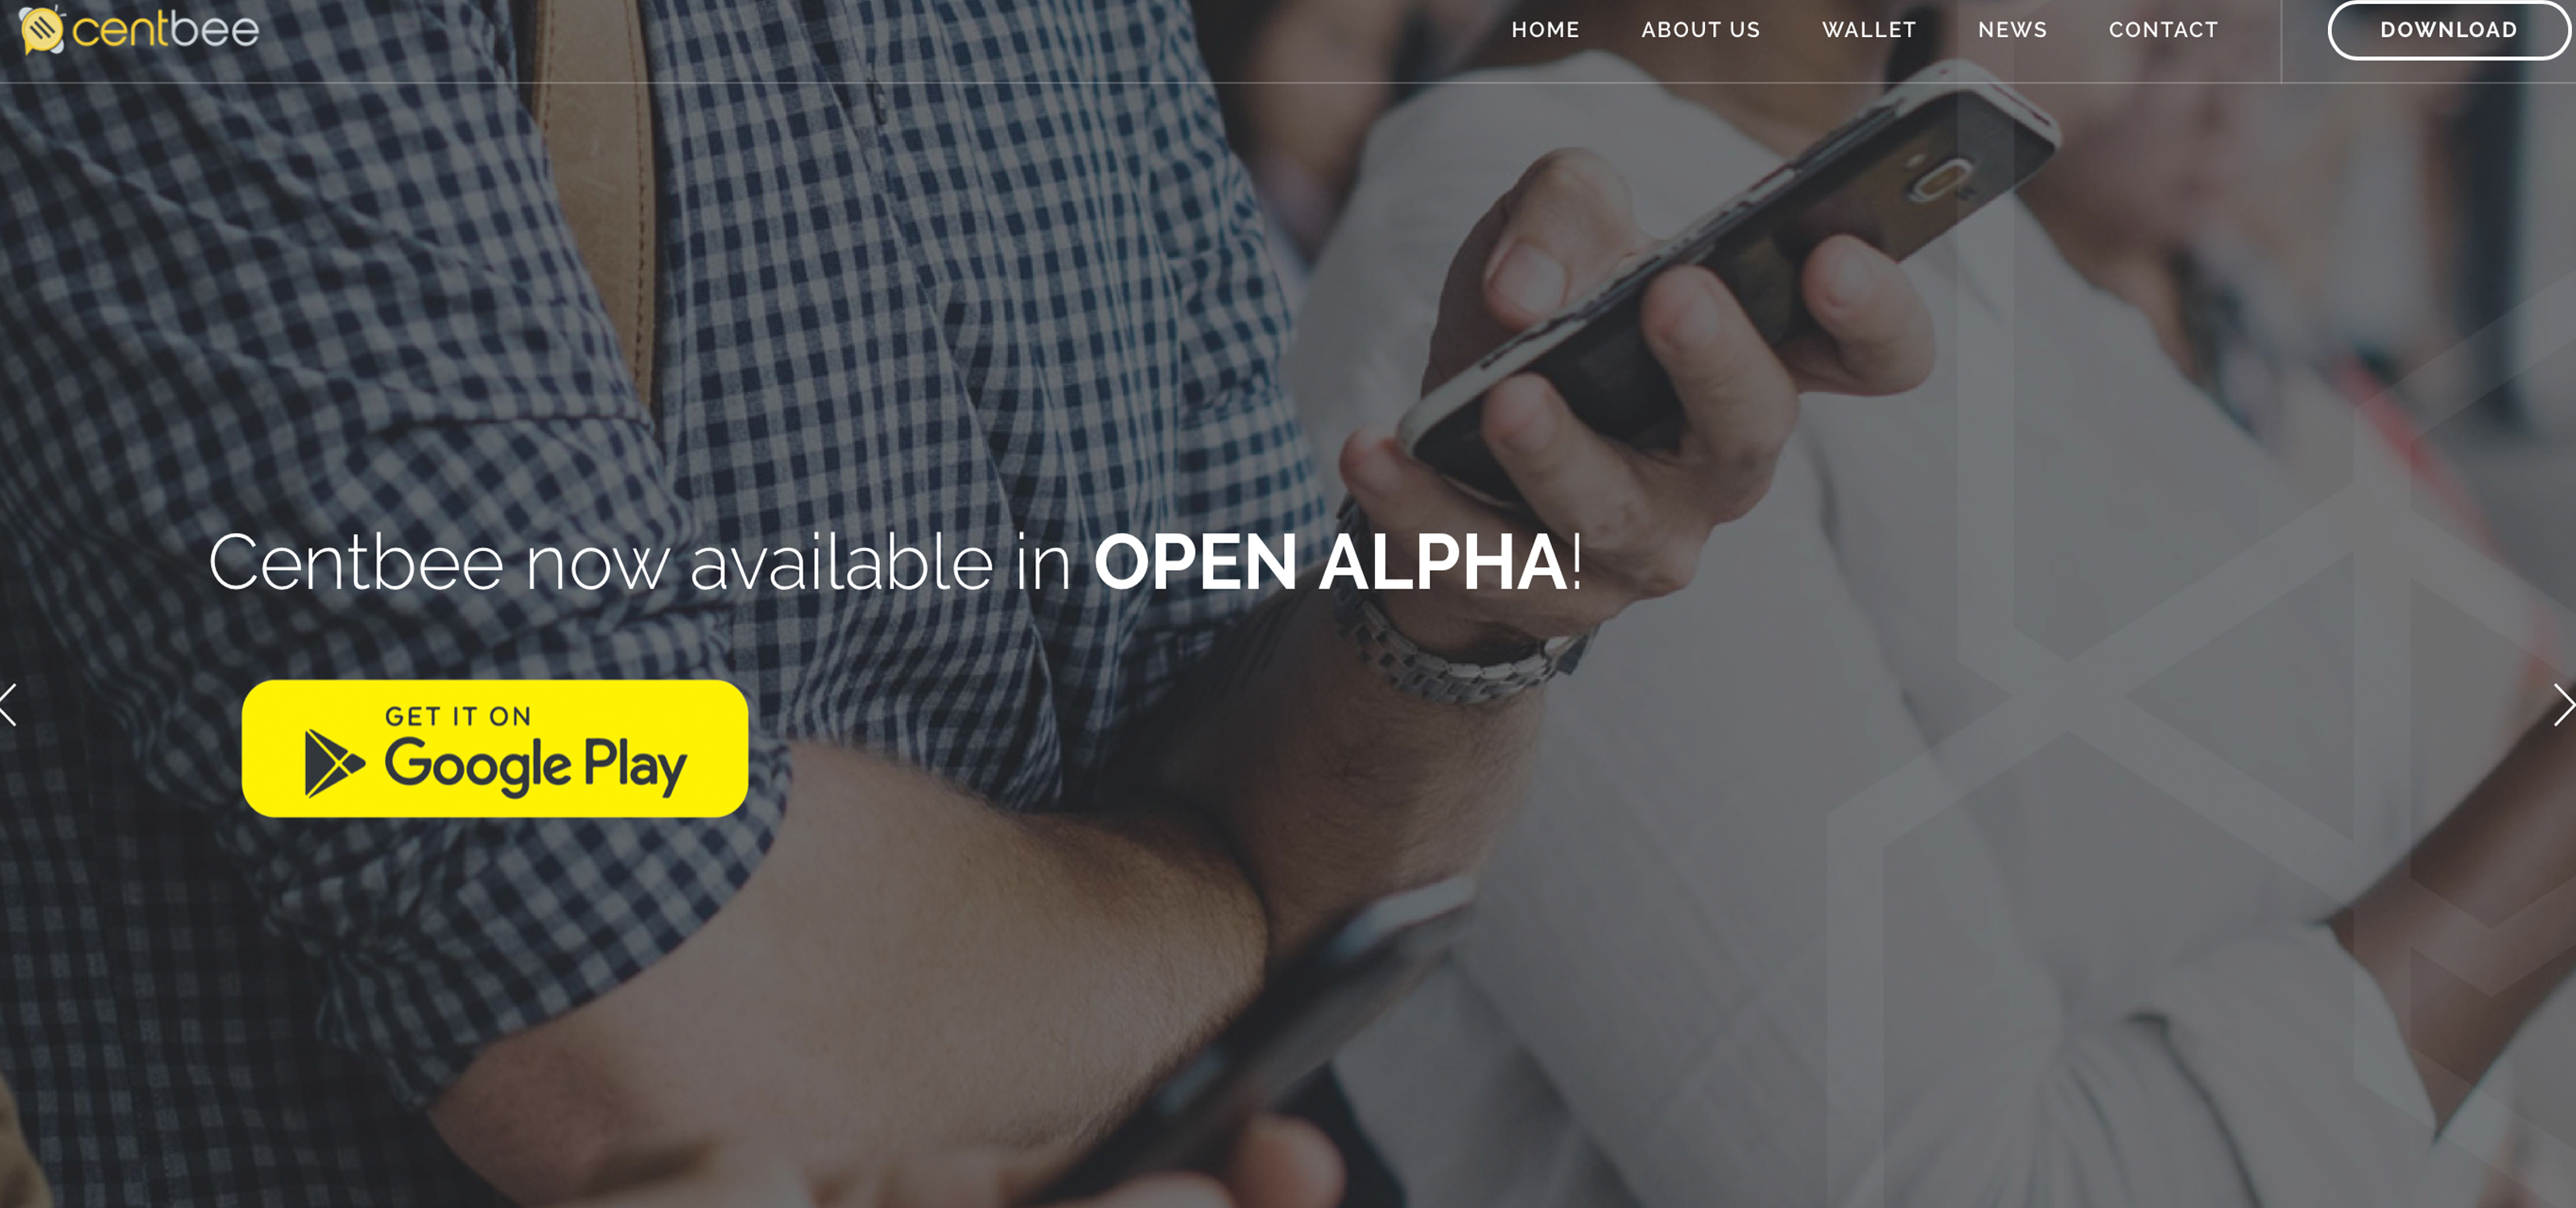 Bitcoin Cash-Focused Centbee Launches Open Alpha Wallet